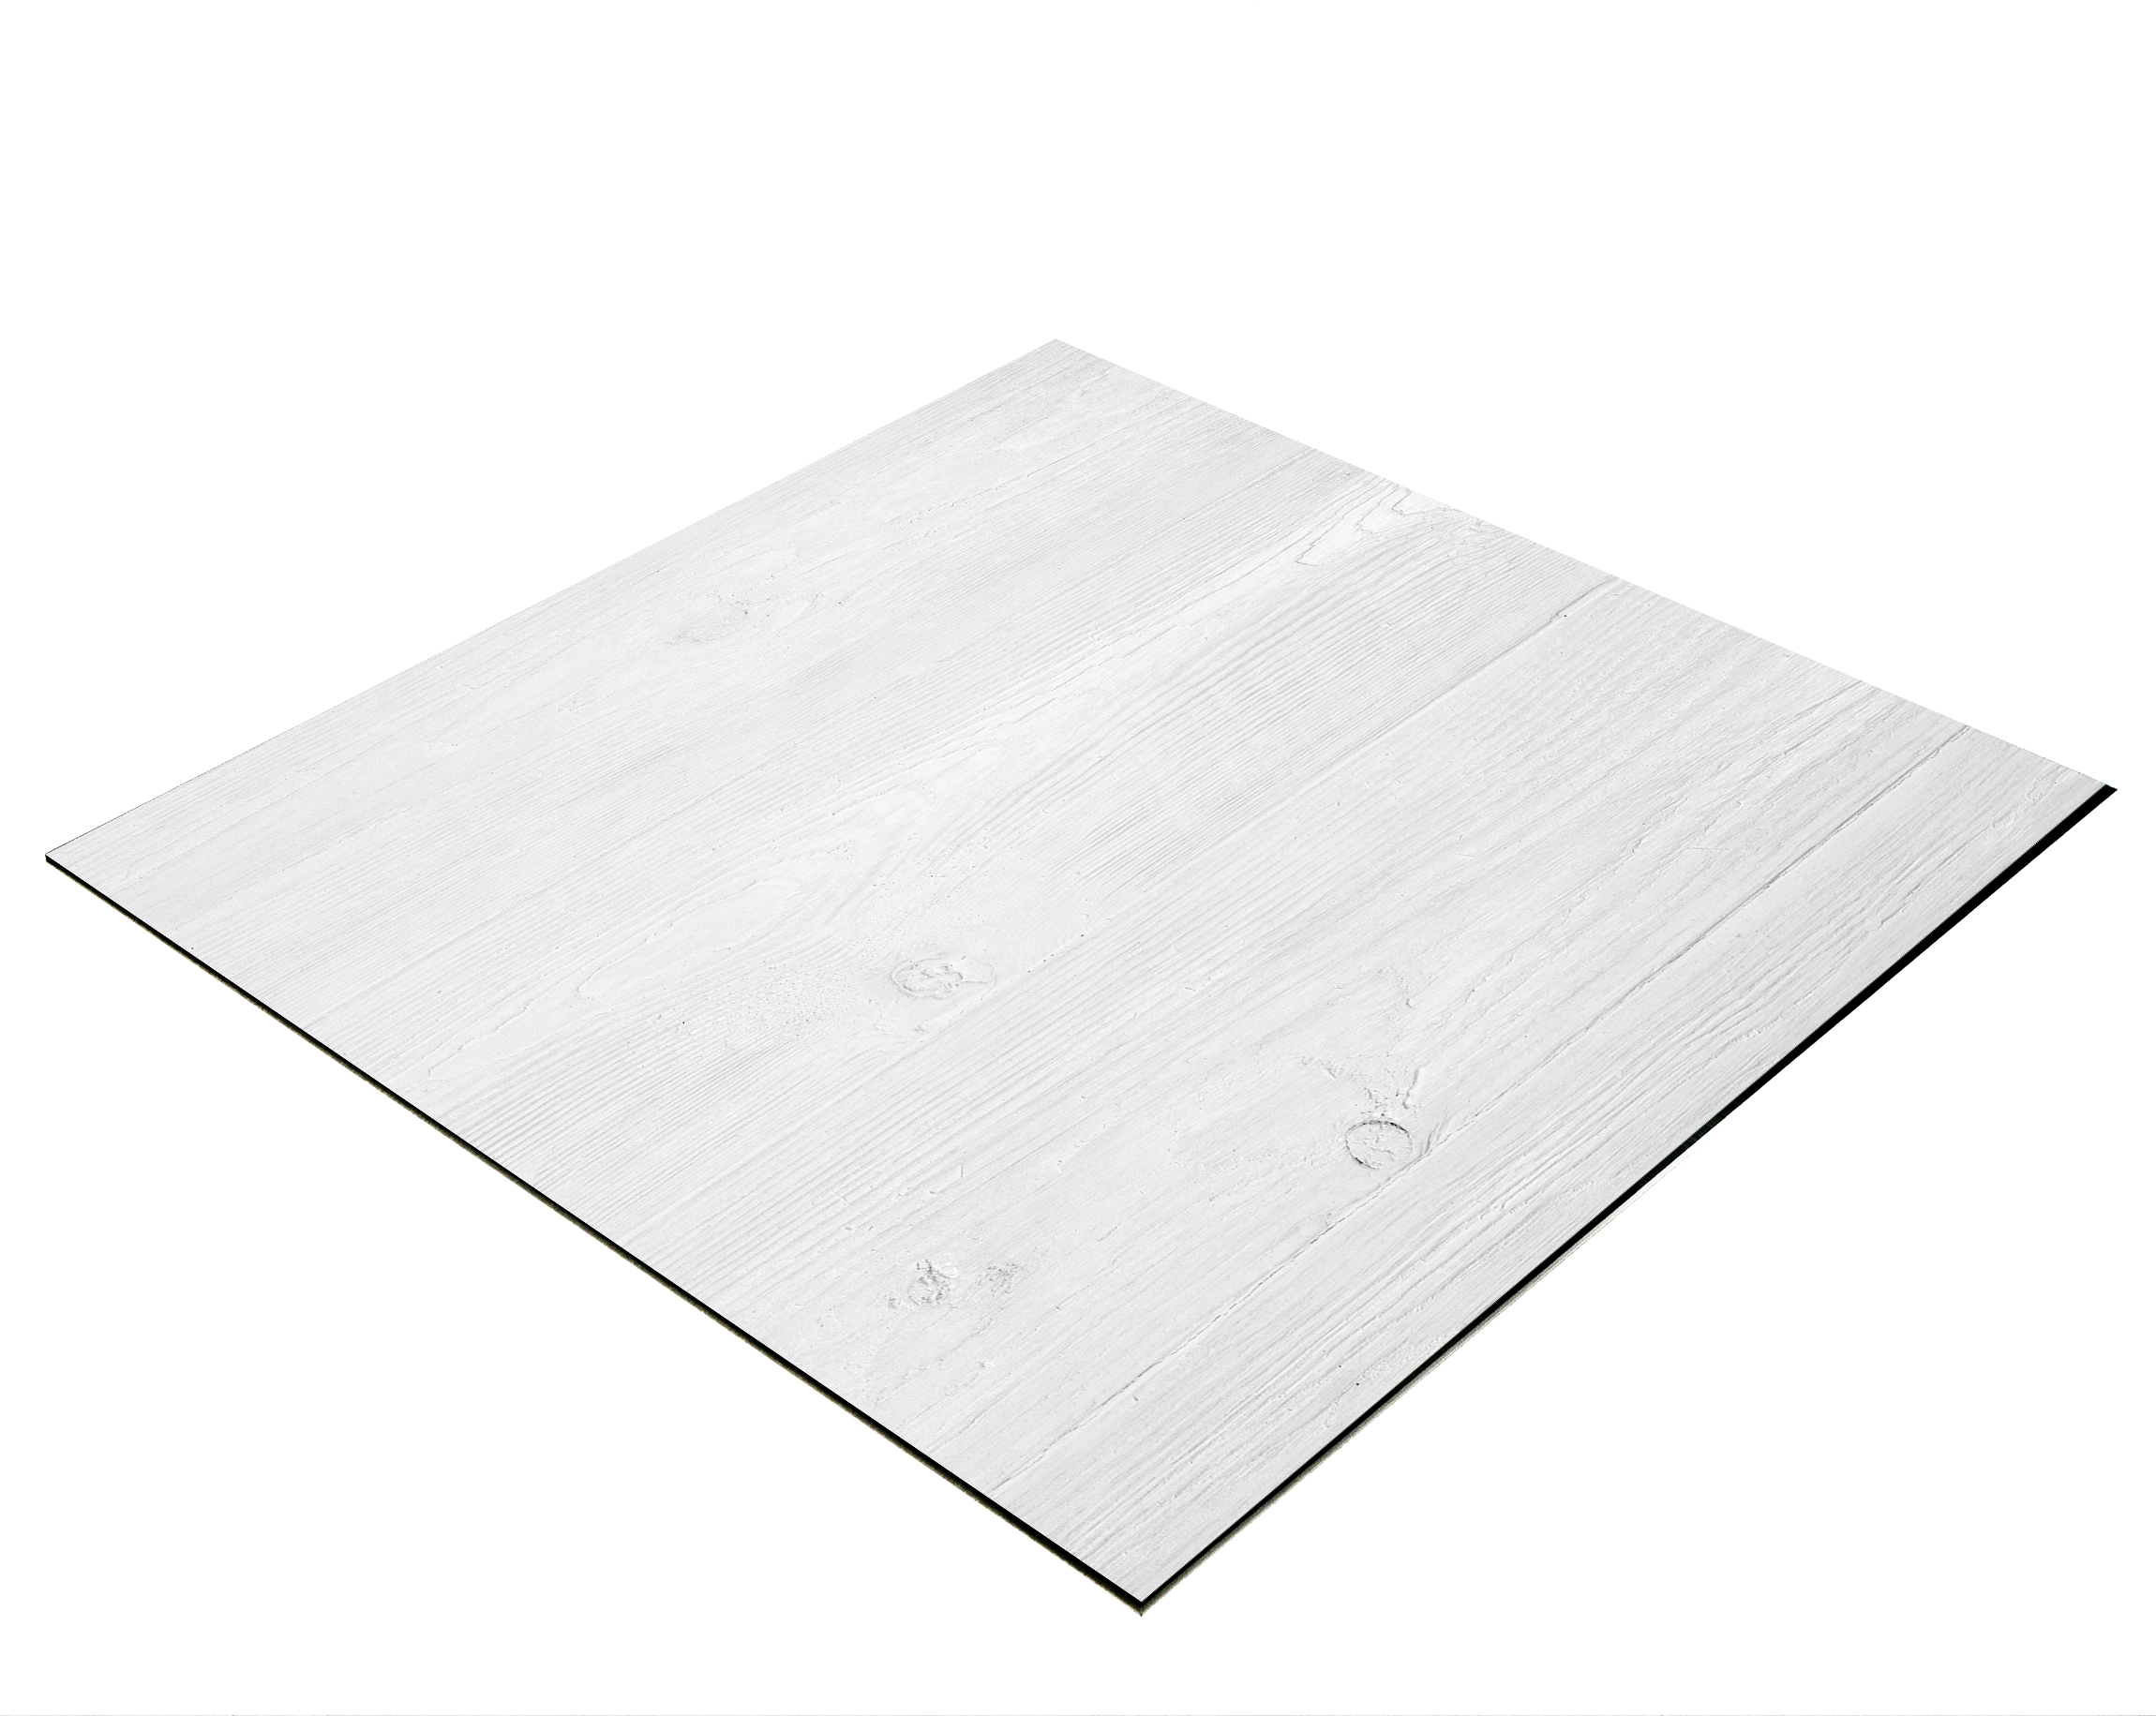 BRESSER Flat Lay Background for Tabletop Photography 60 x 60cm White Wood Planks